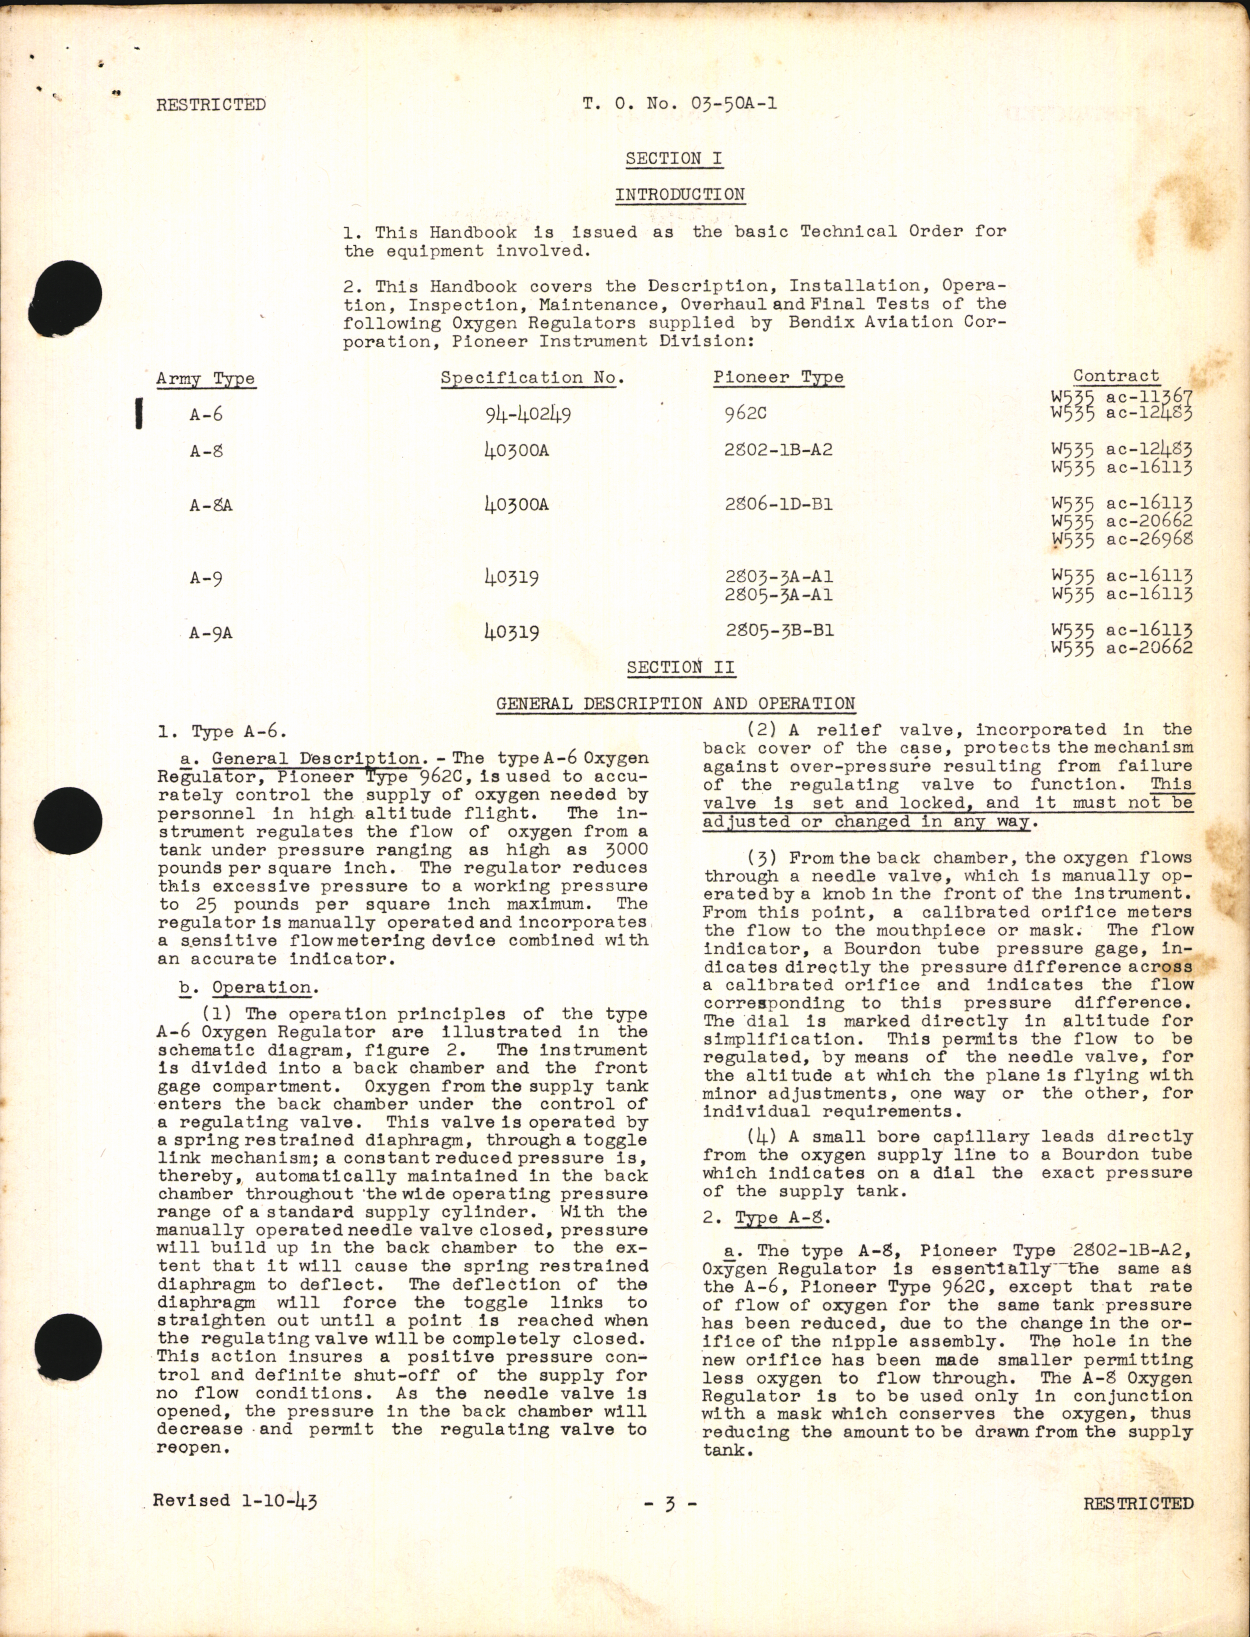 Sample page 5 from AirCorps Library document: Handbook of Instructions with Parts Catalog for Oxygen Regulators